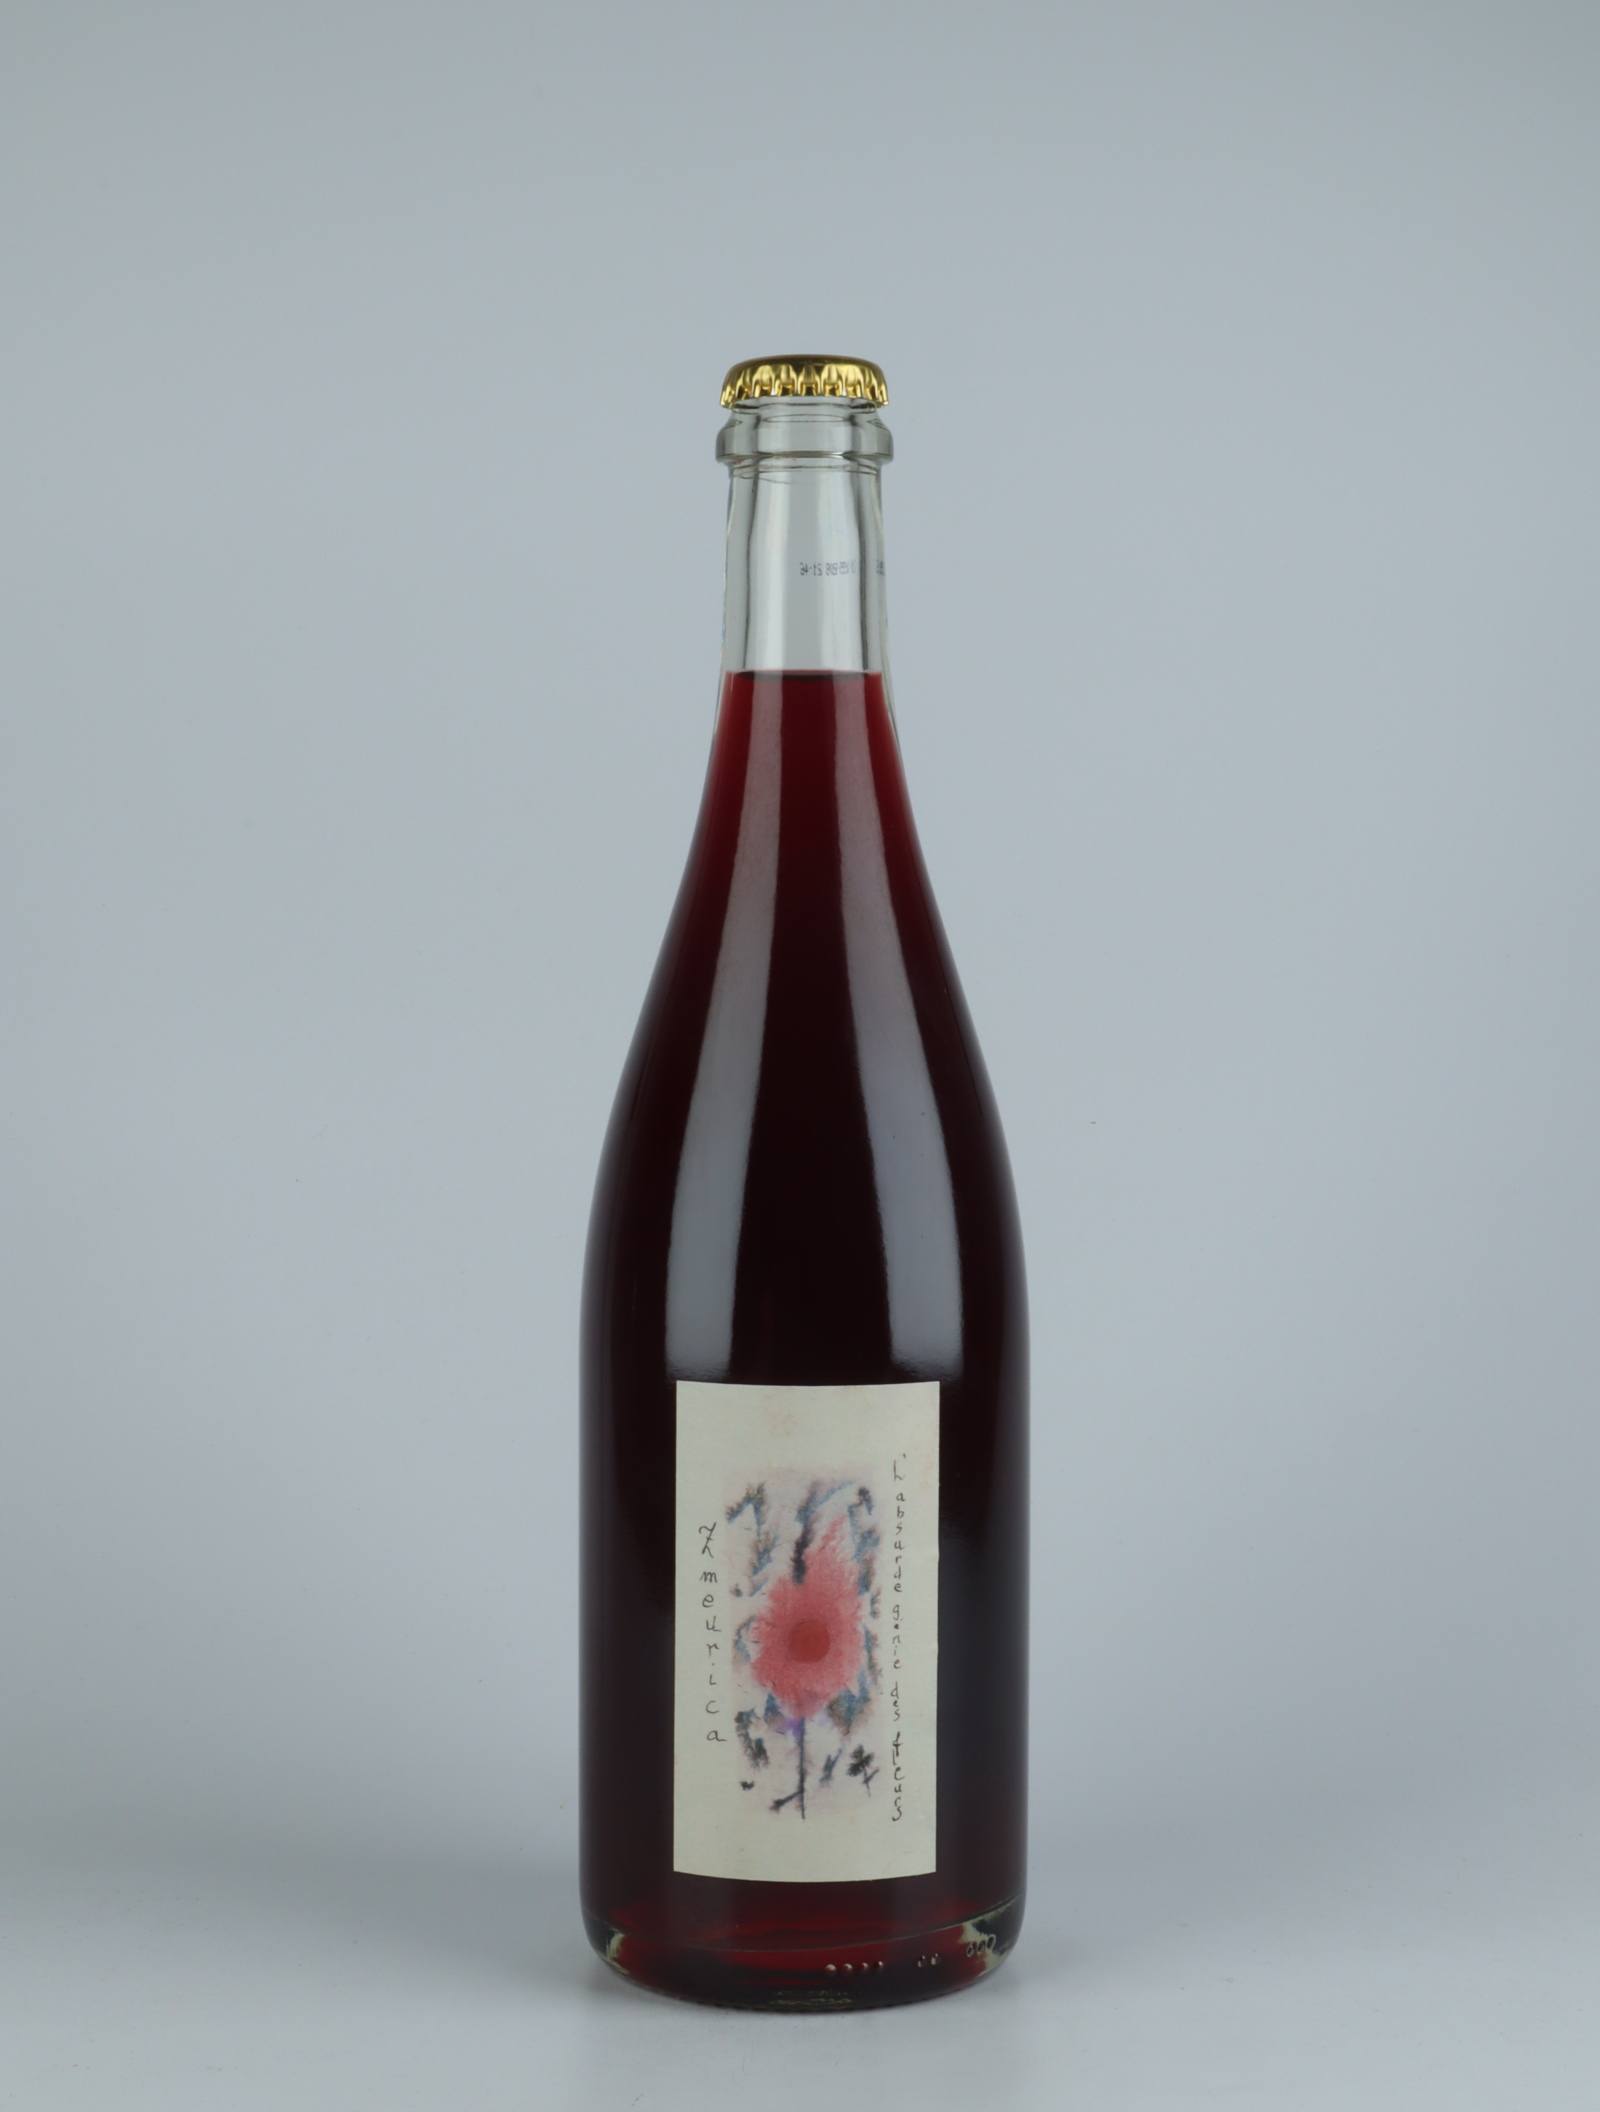 A bottle 2020 Zmeurica Red wine from Absurde Génie des Fleurs, Languedoc in France